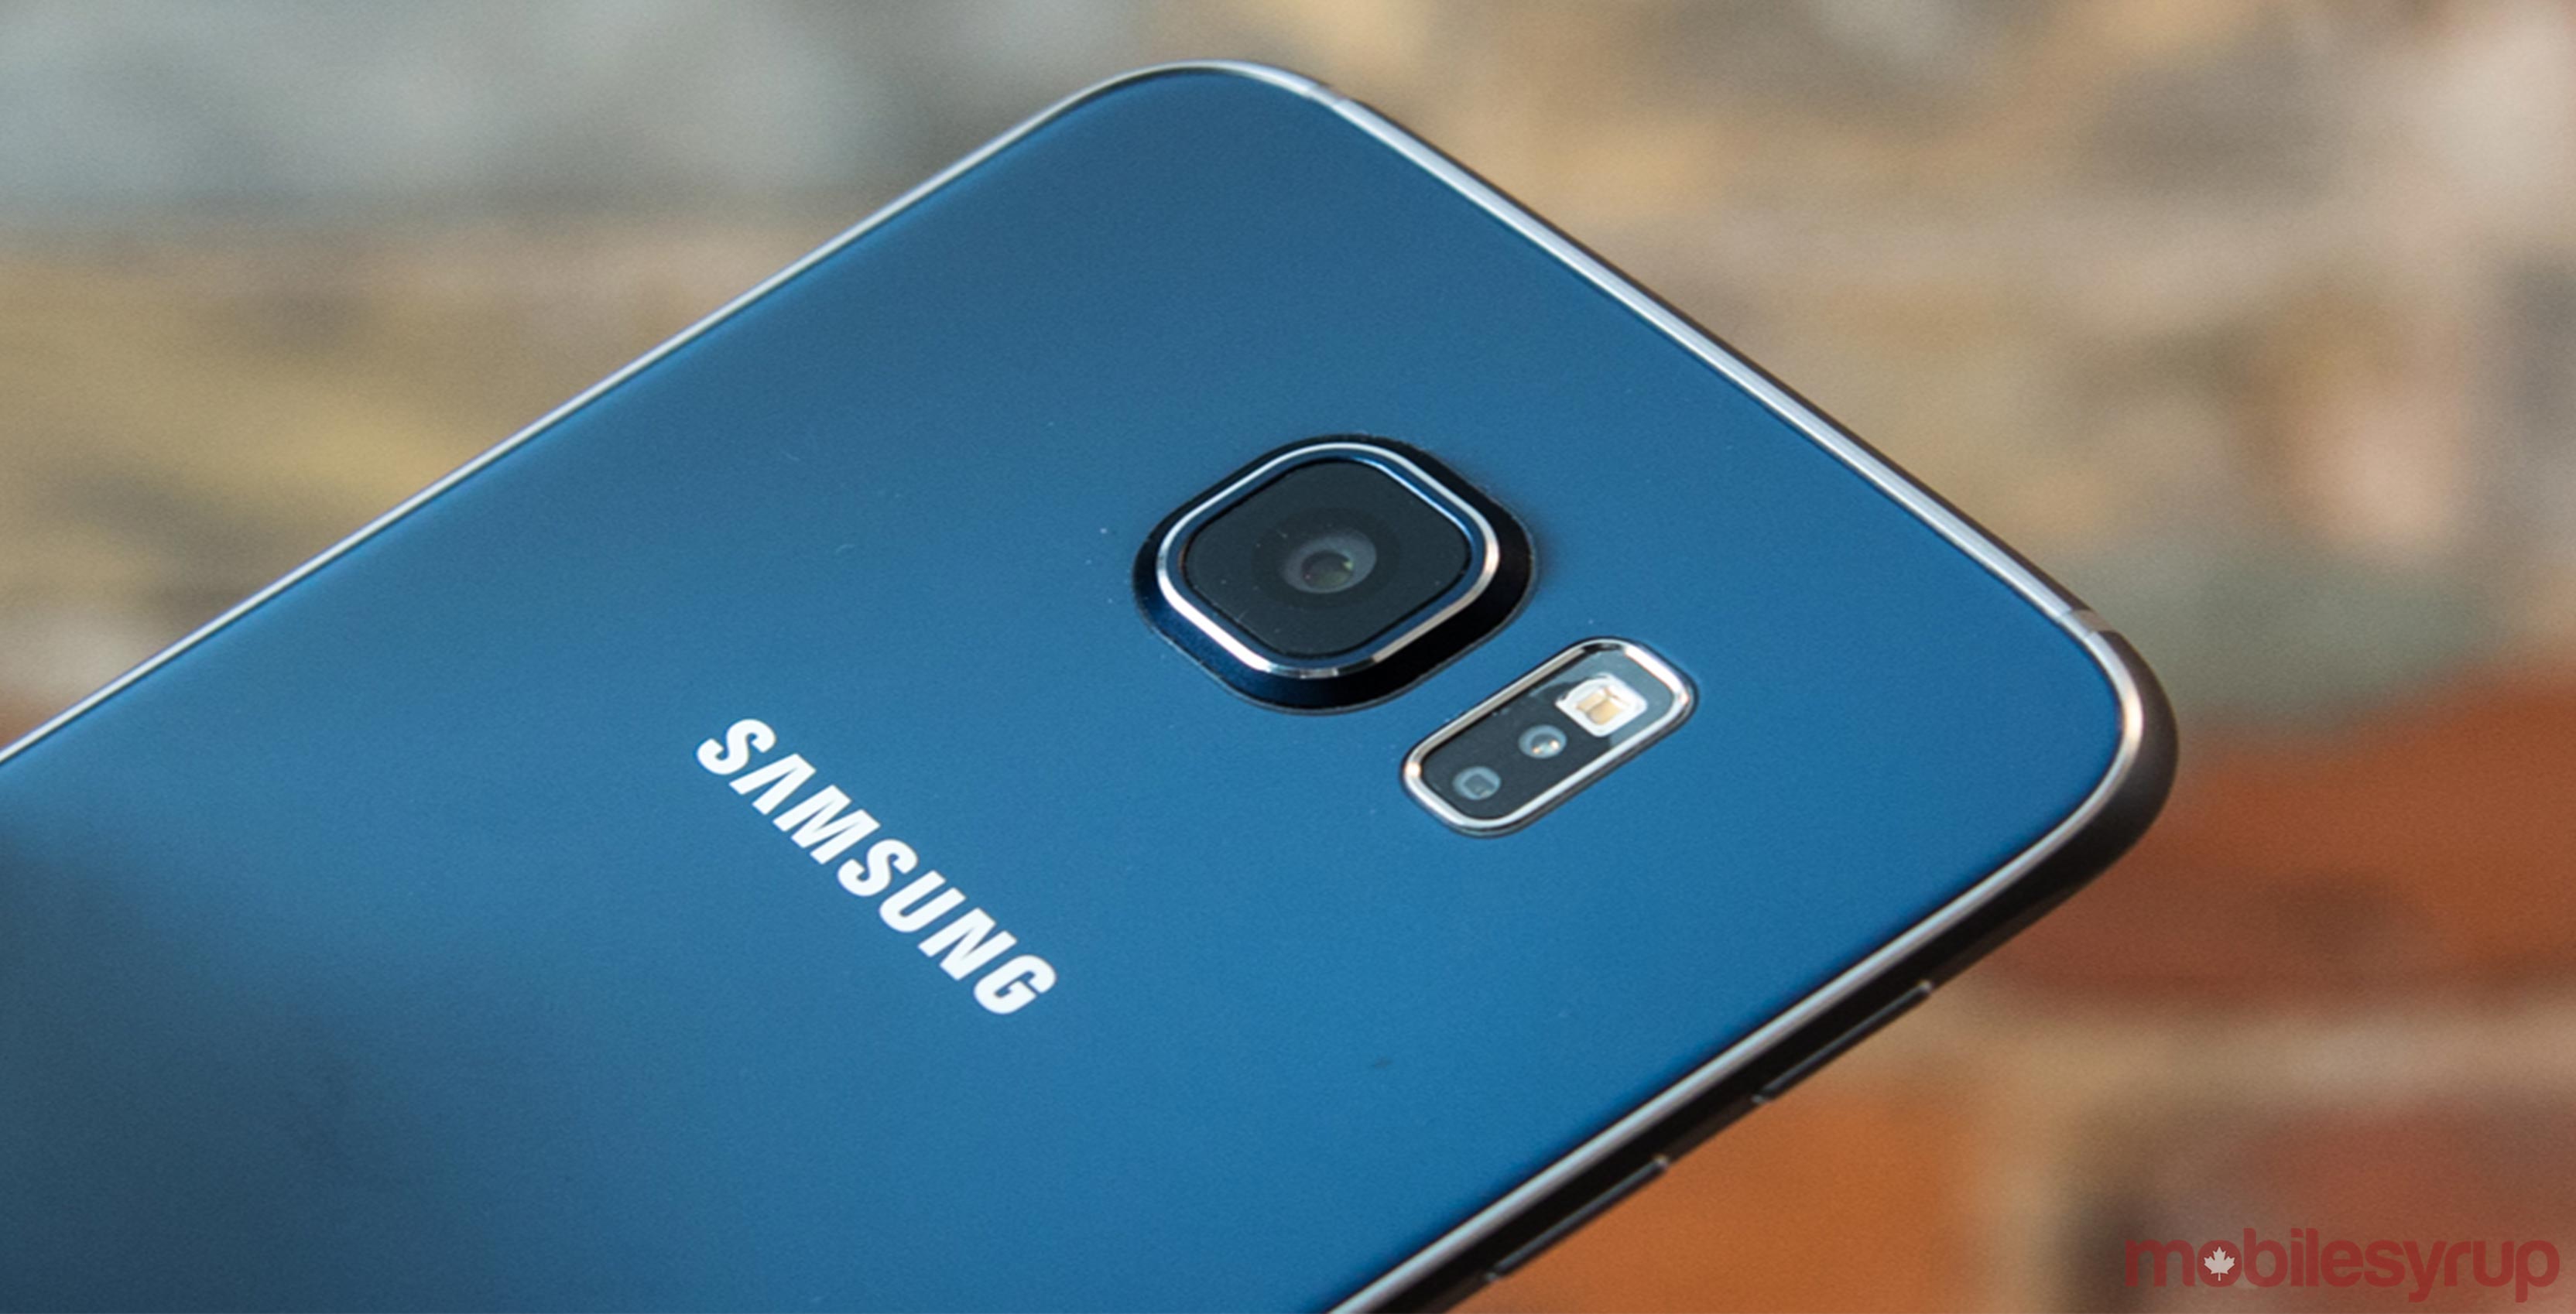 Samsung Rogers Galaxy S6 android 7 rollout